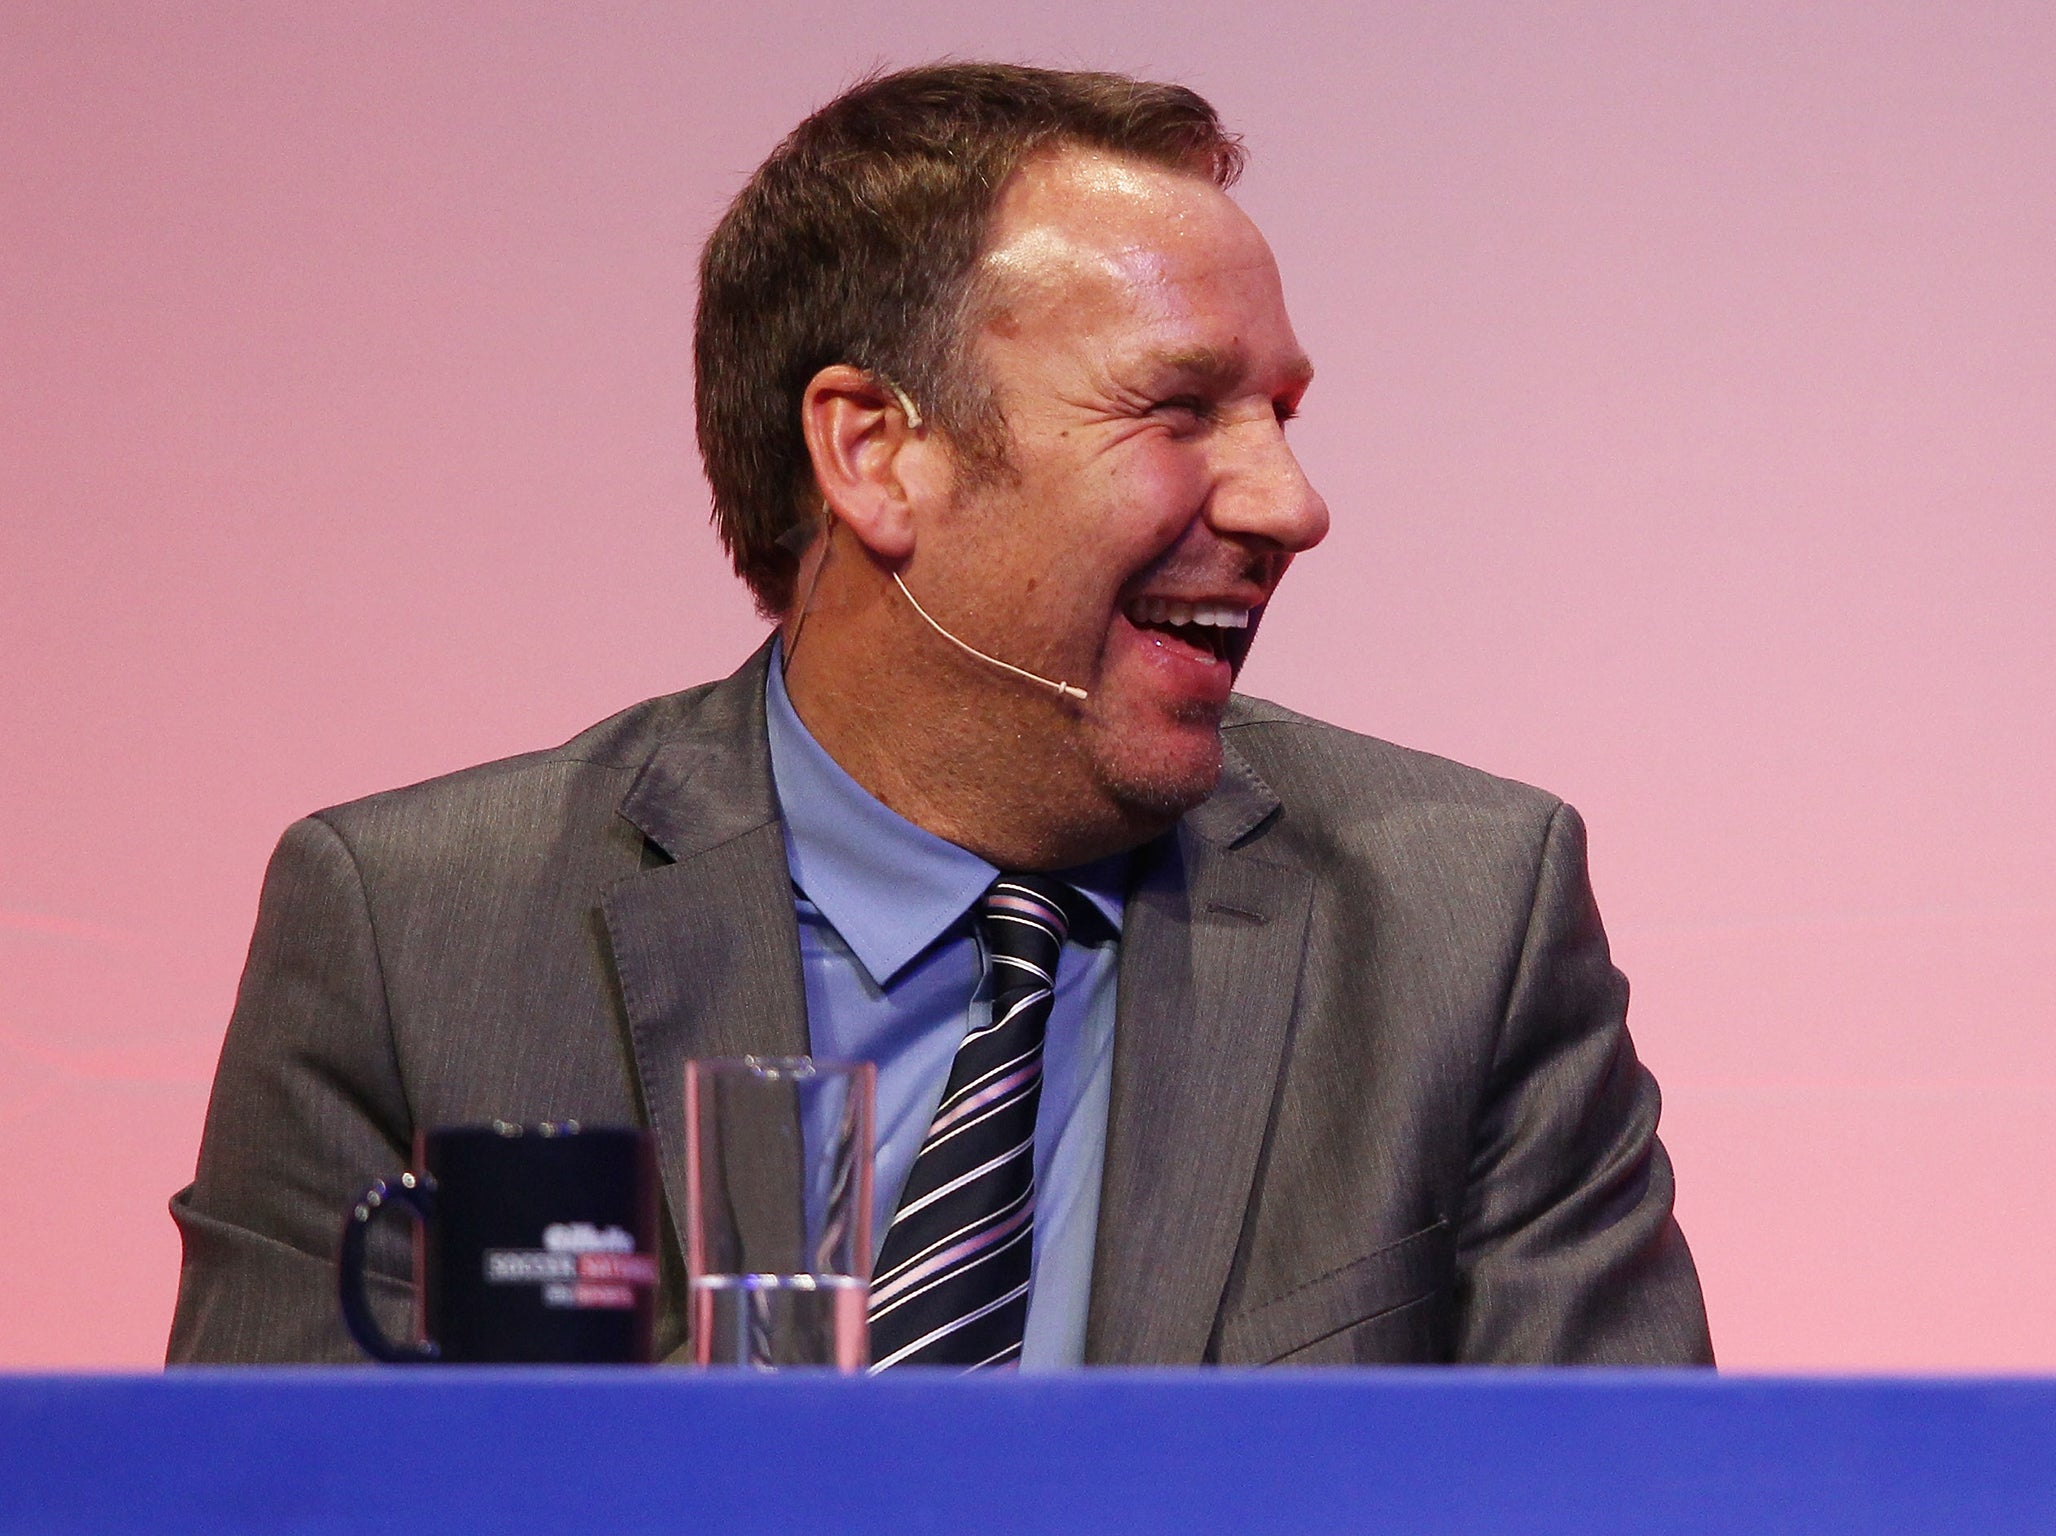 Merson thinks Wenger lacks the tactical nous of Redknapp